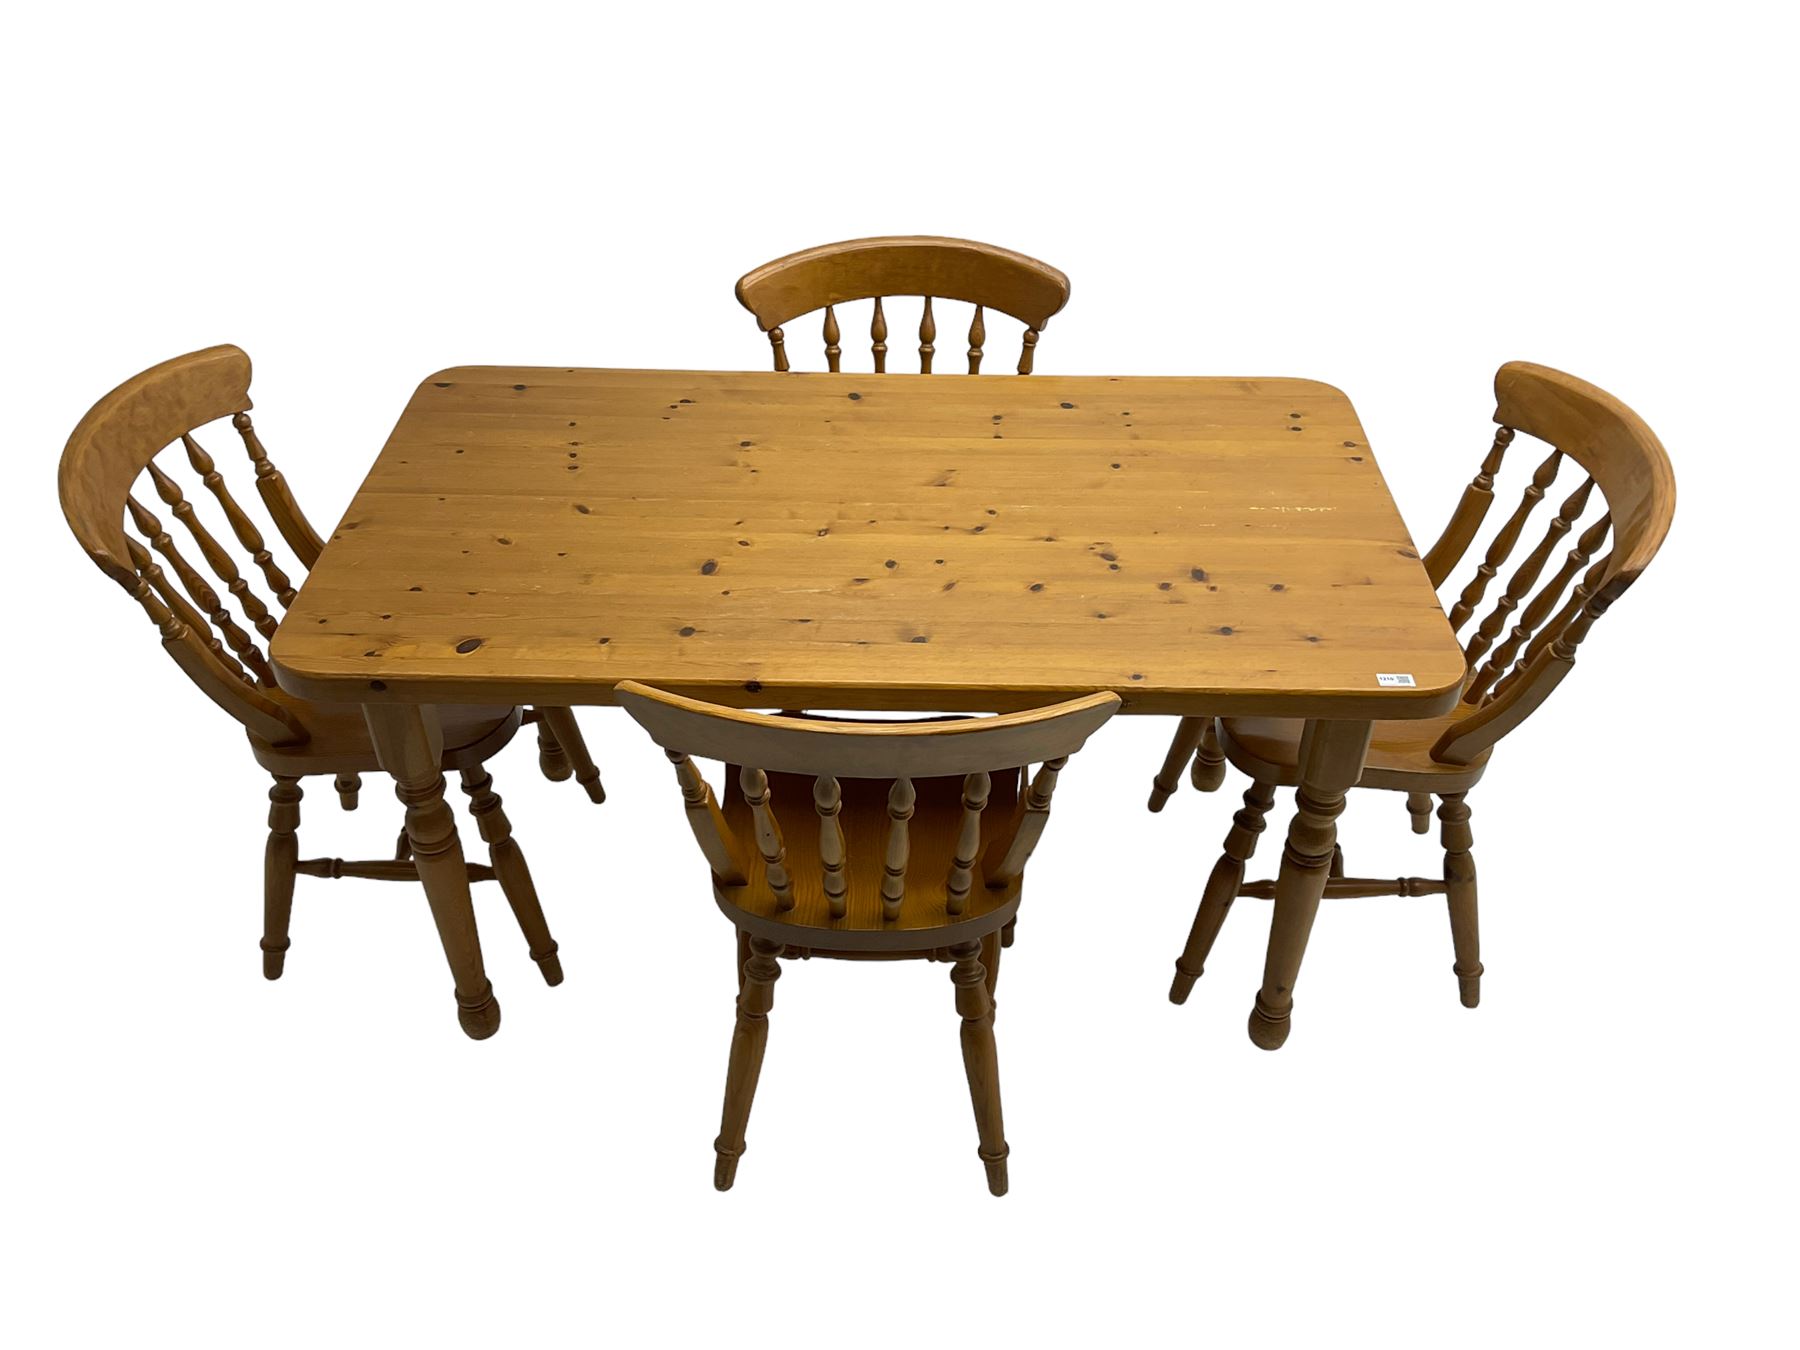 Traditional pine dining table - Image 2 of 6